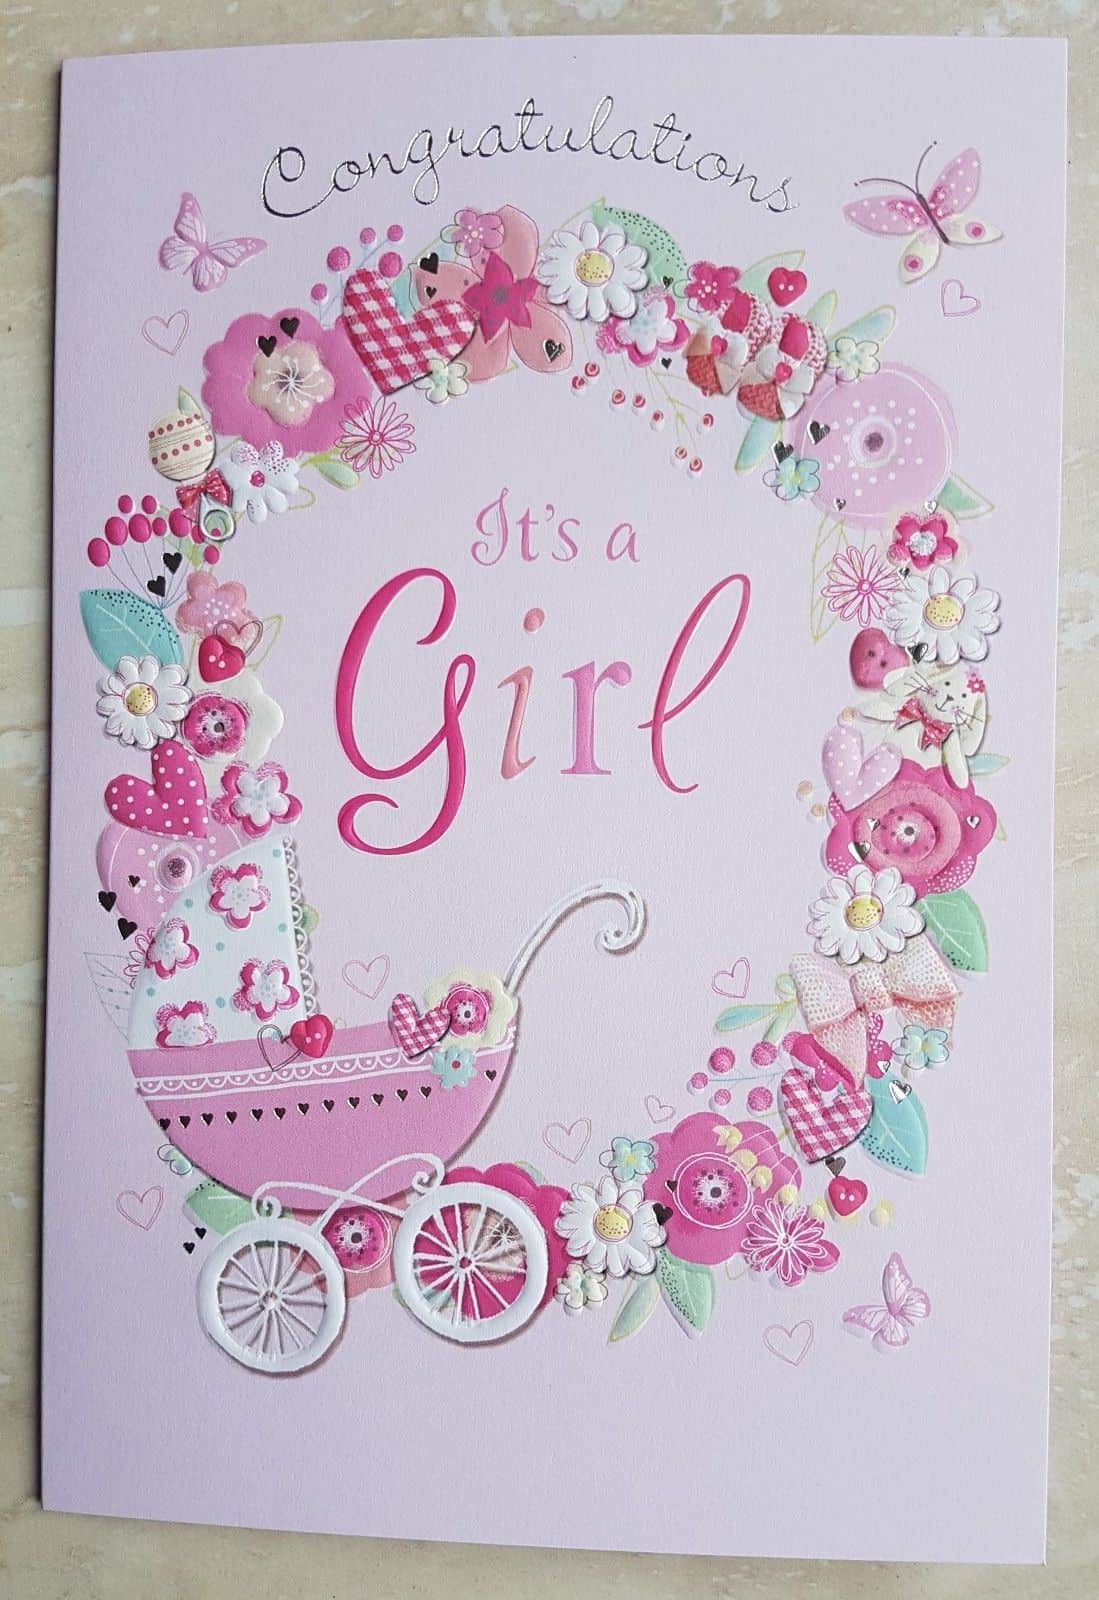 New Baby Girl Card With Embossed ITS A GIRL Design - With Love Gifts ...